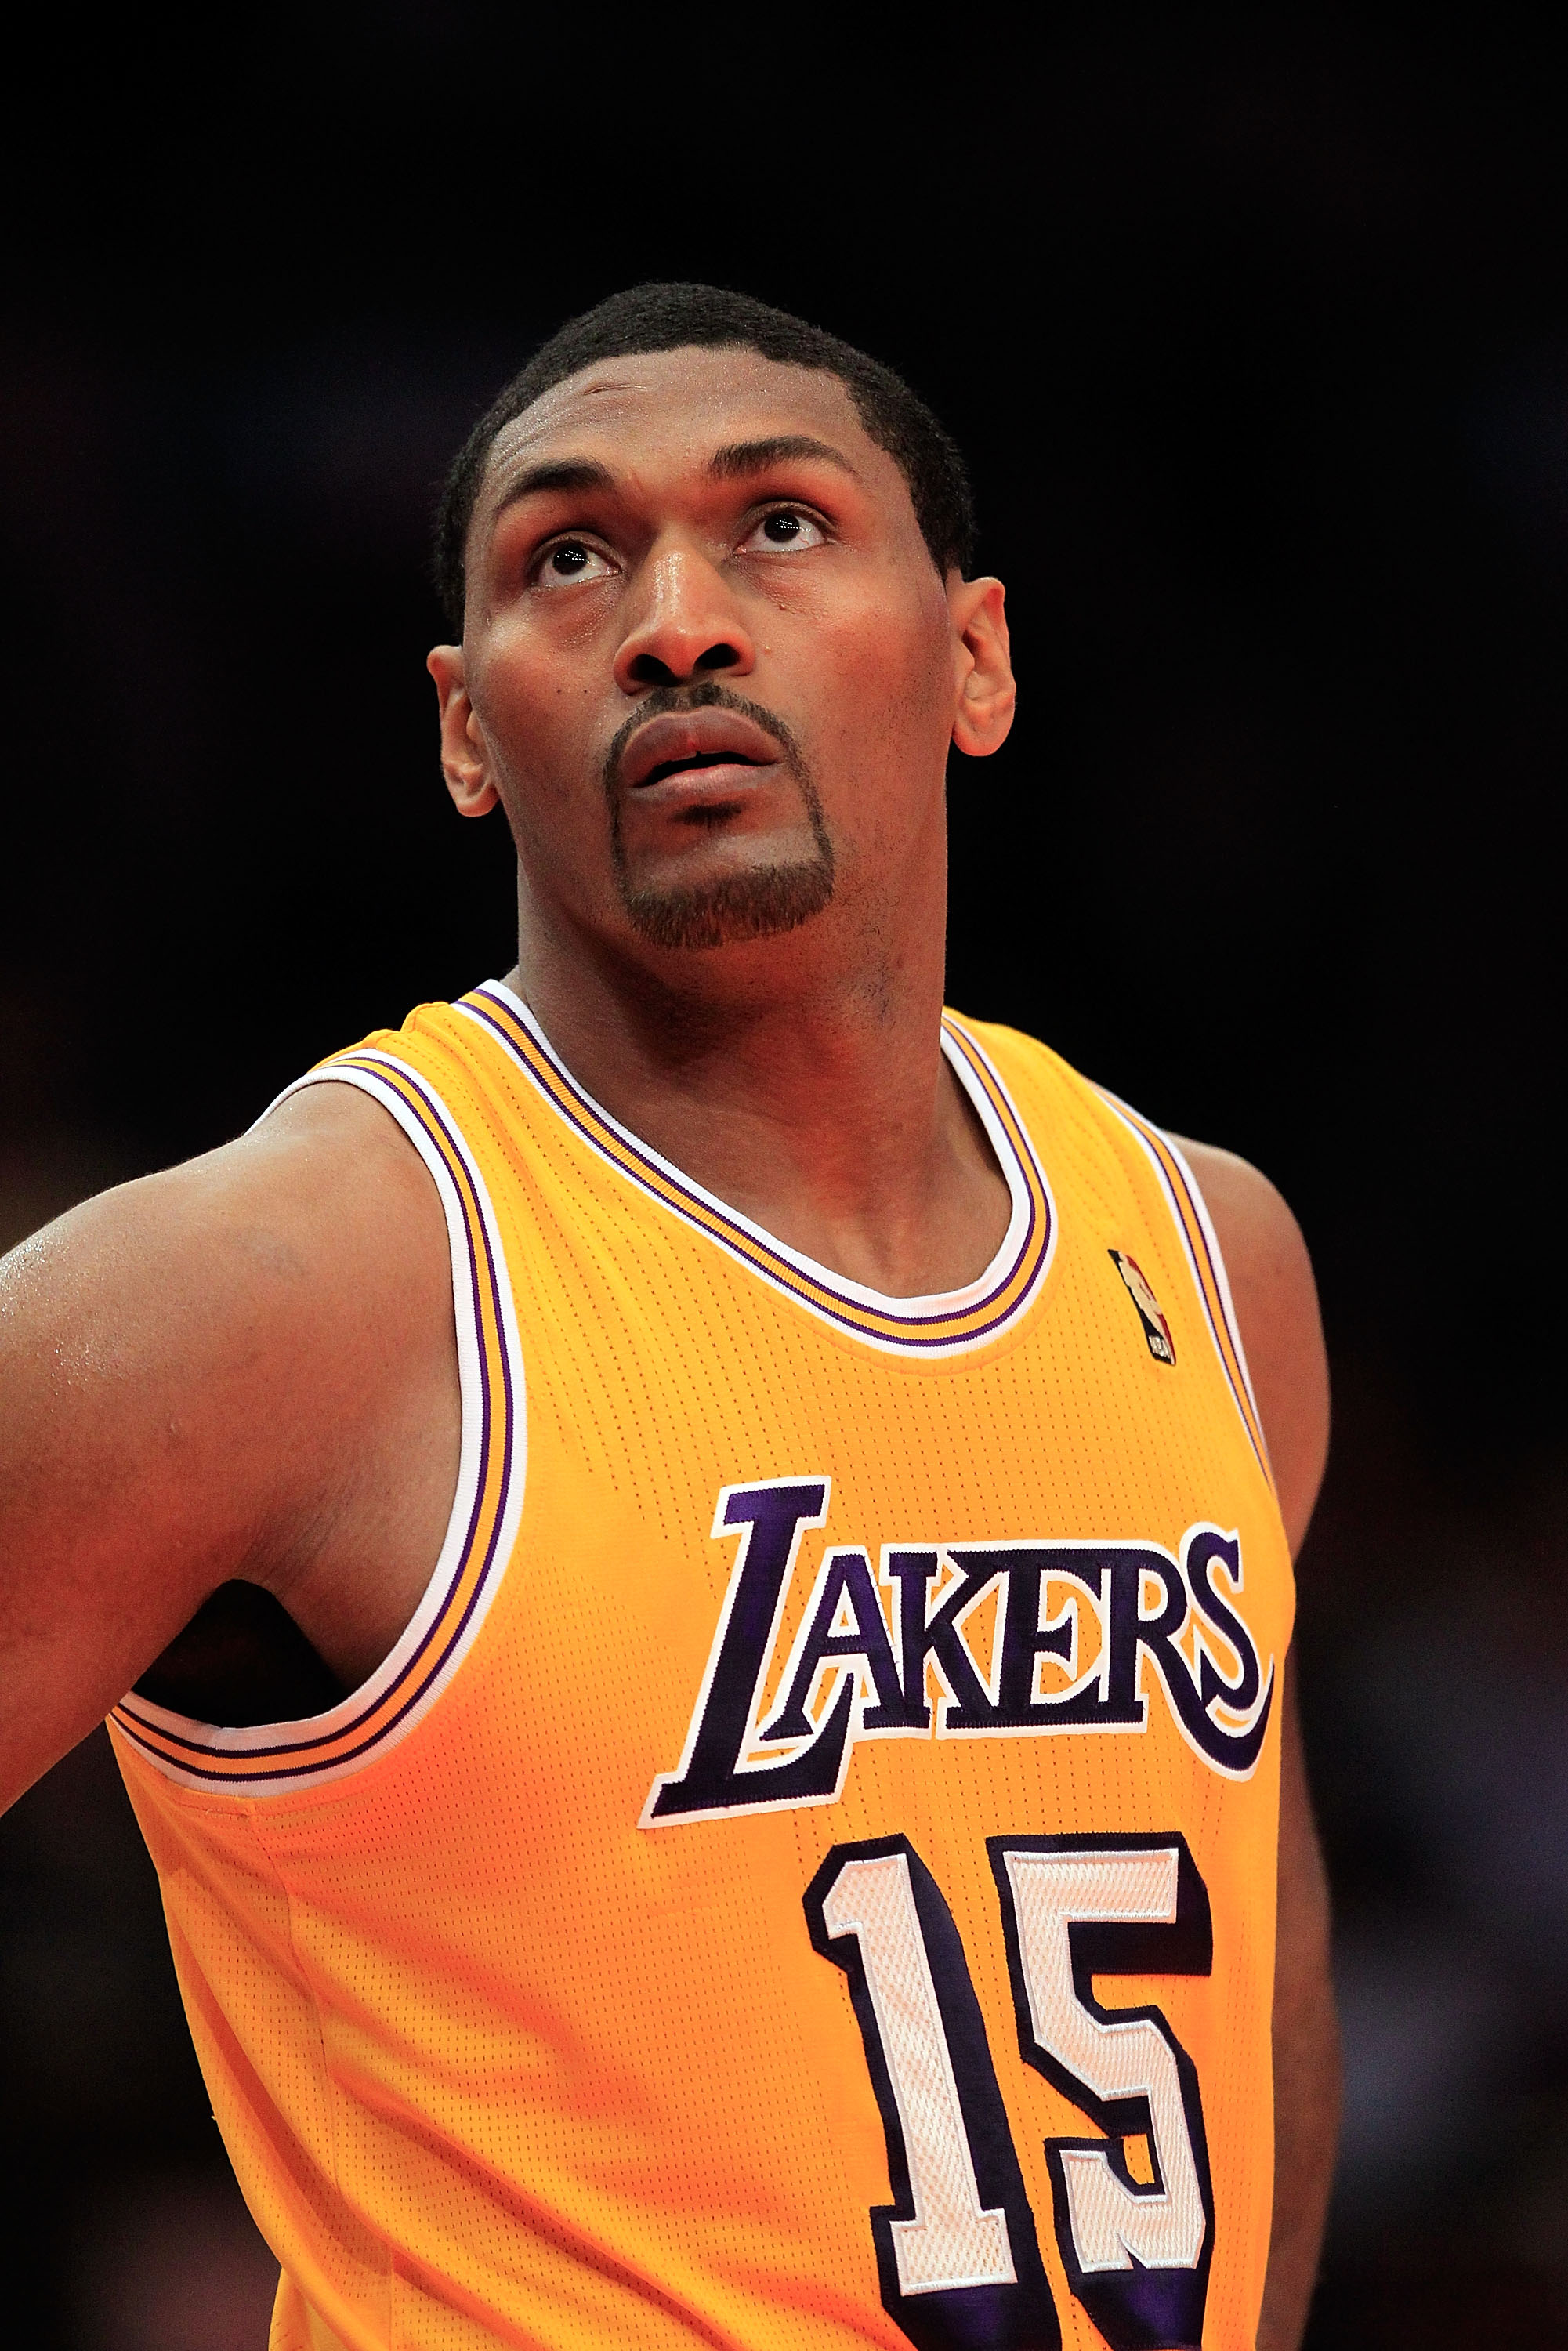 NEW YORK, NY - FEBRUARY 11: Ron Artest #15 of the Los Angeles Lakers on the court against the New York Knicks at Madison Square Garden on February 11, 2011 in New York City. NOTE TO USER: User expressly acknowledges and agrees that, by downloading and/or